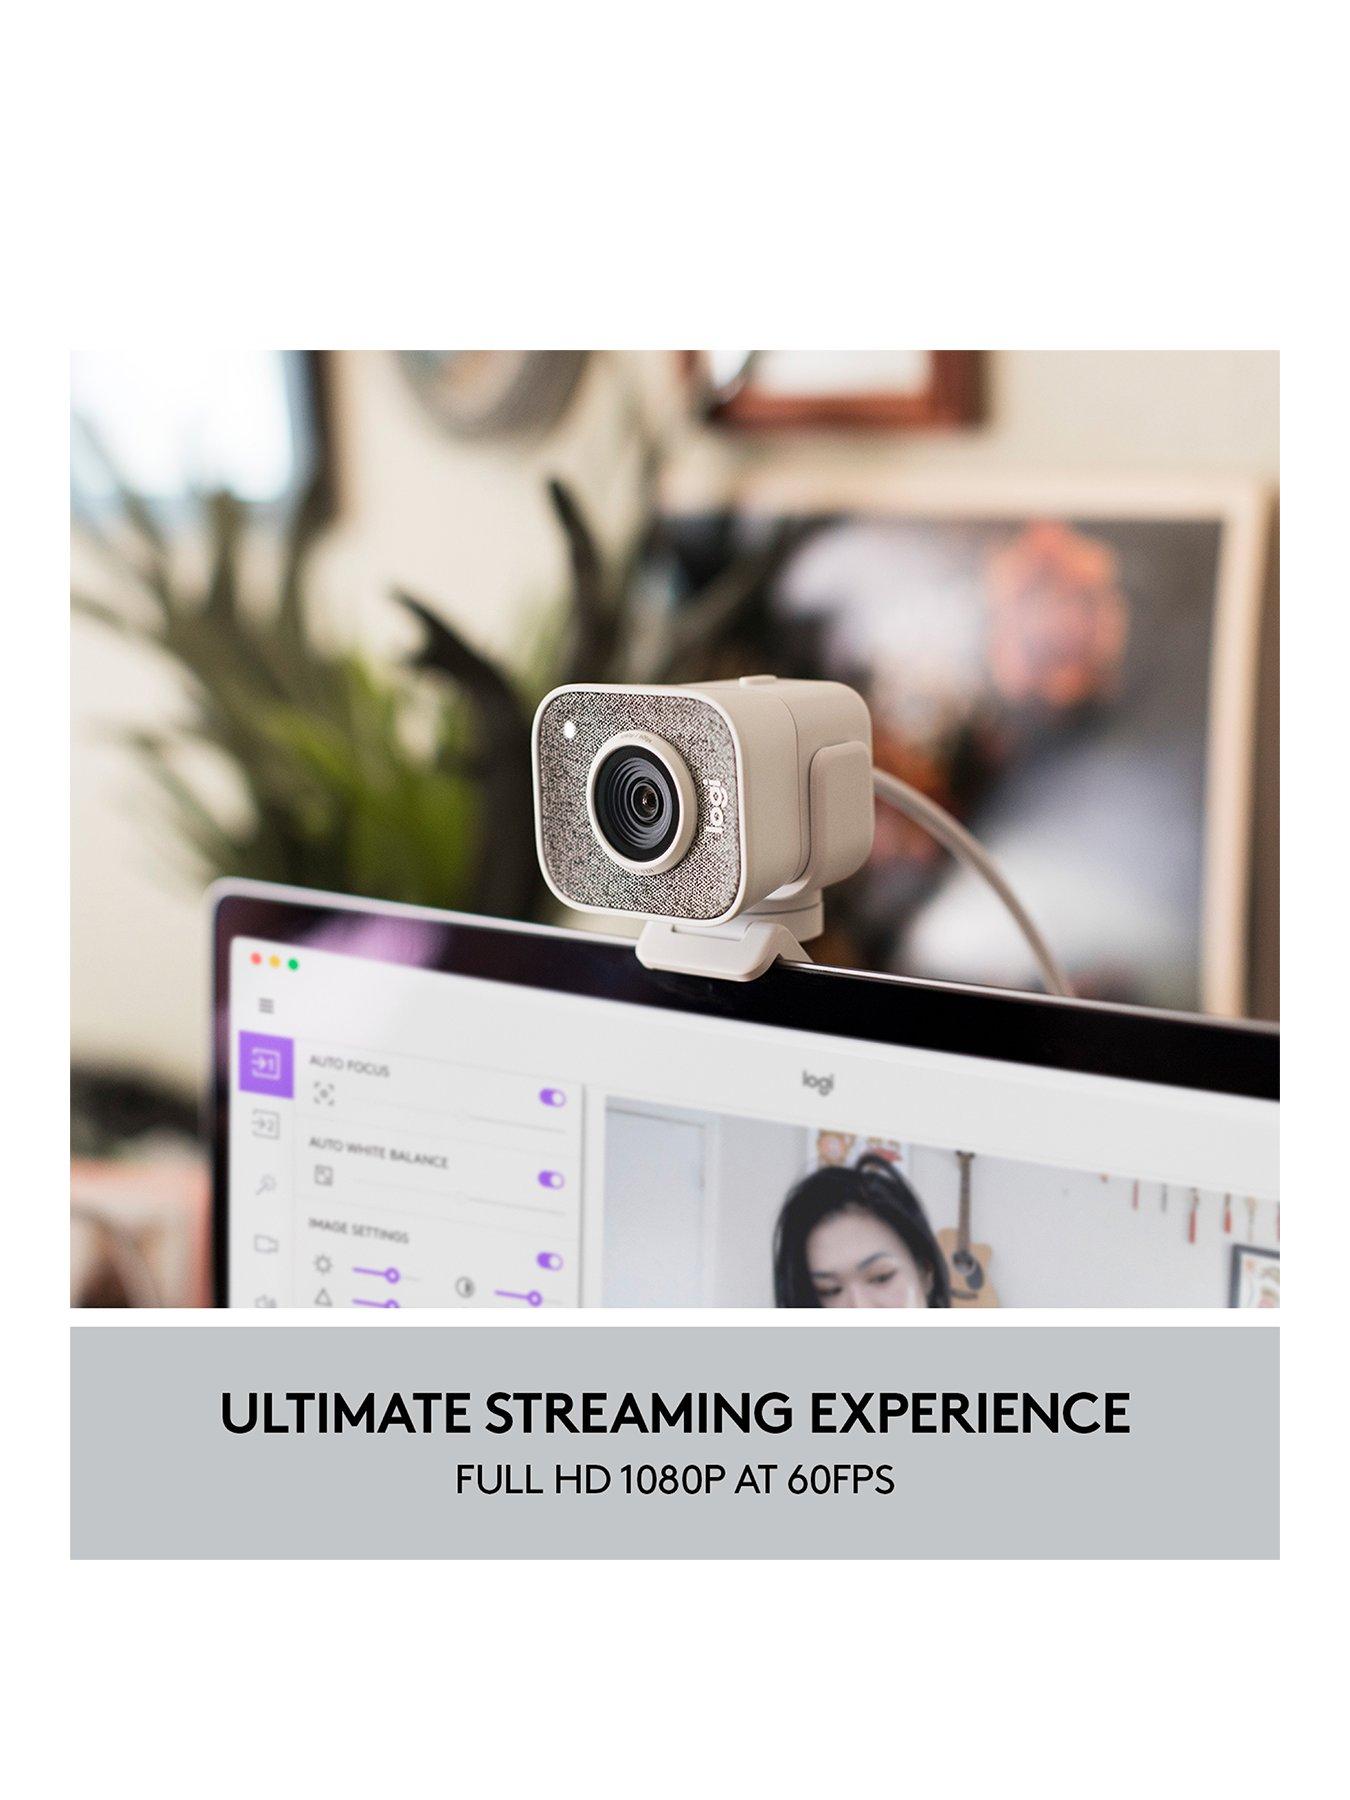 Logitech StreamCam review: an excellent streaming webcam - if you can get  the most out of it